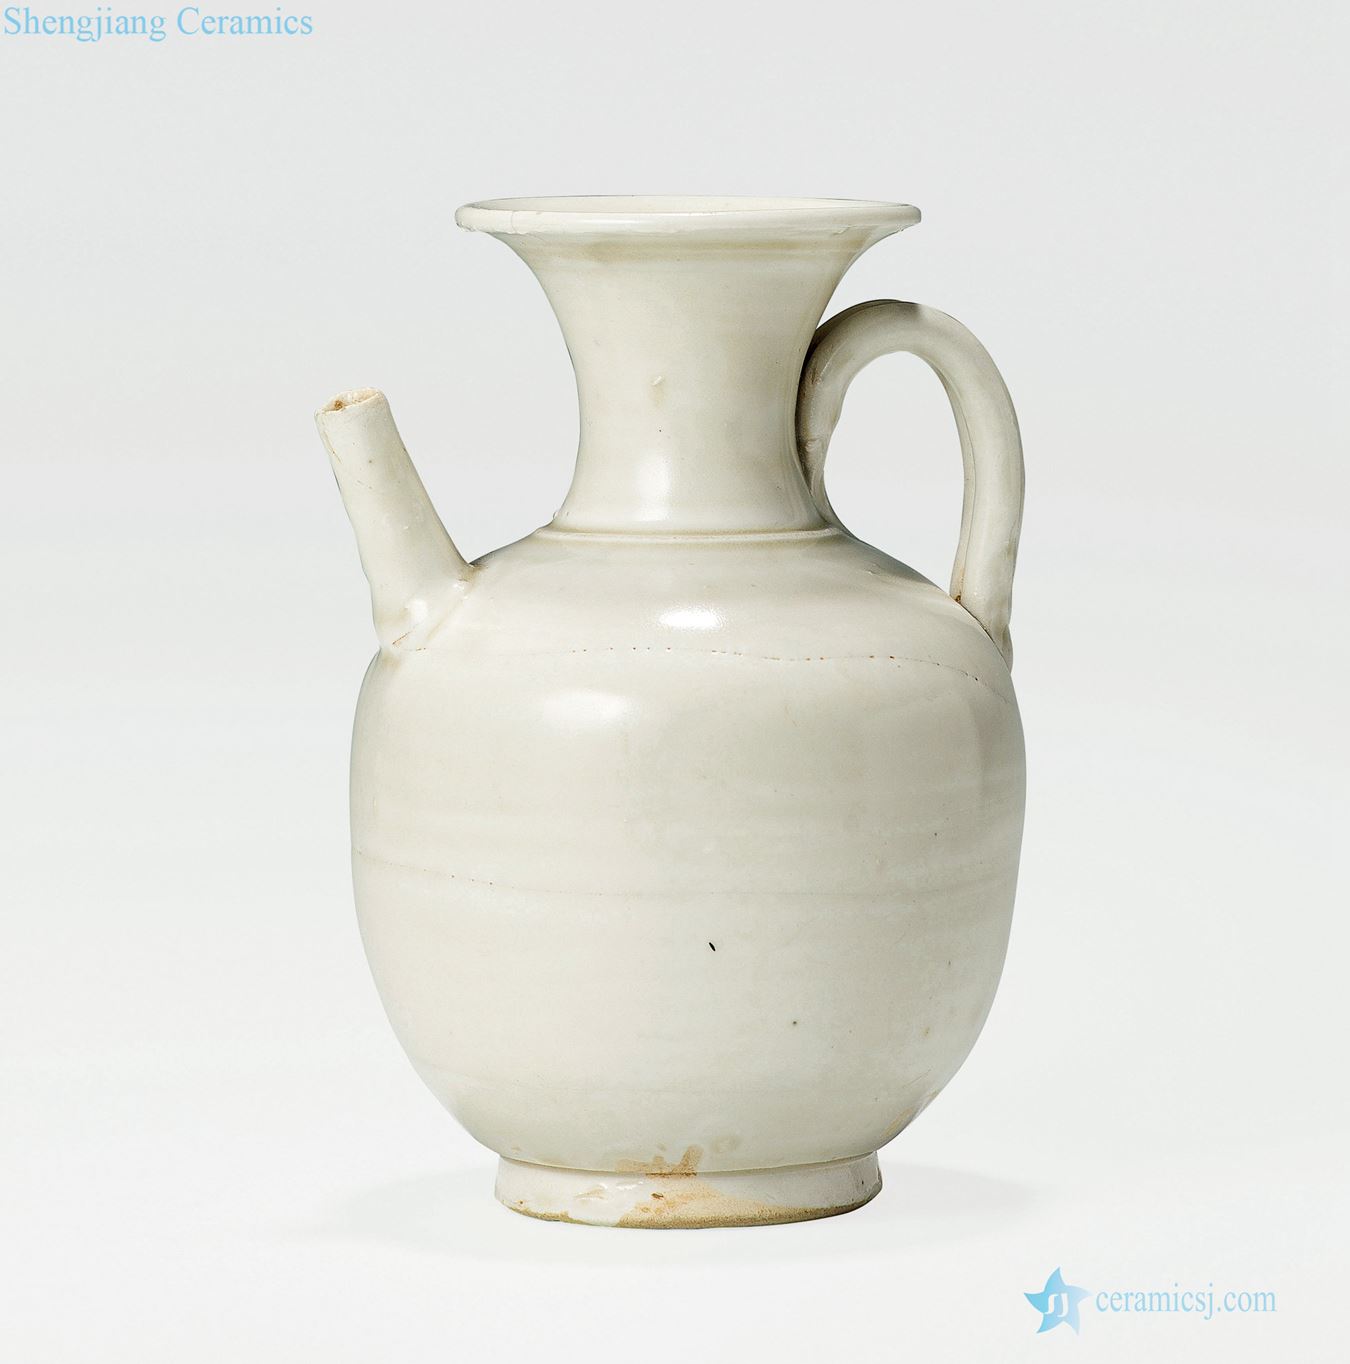 Northern song dynasty kiln of commentary